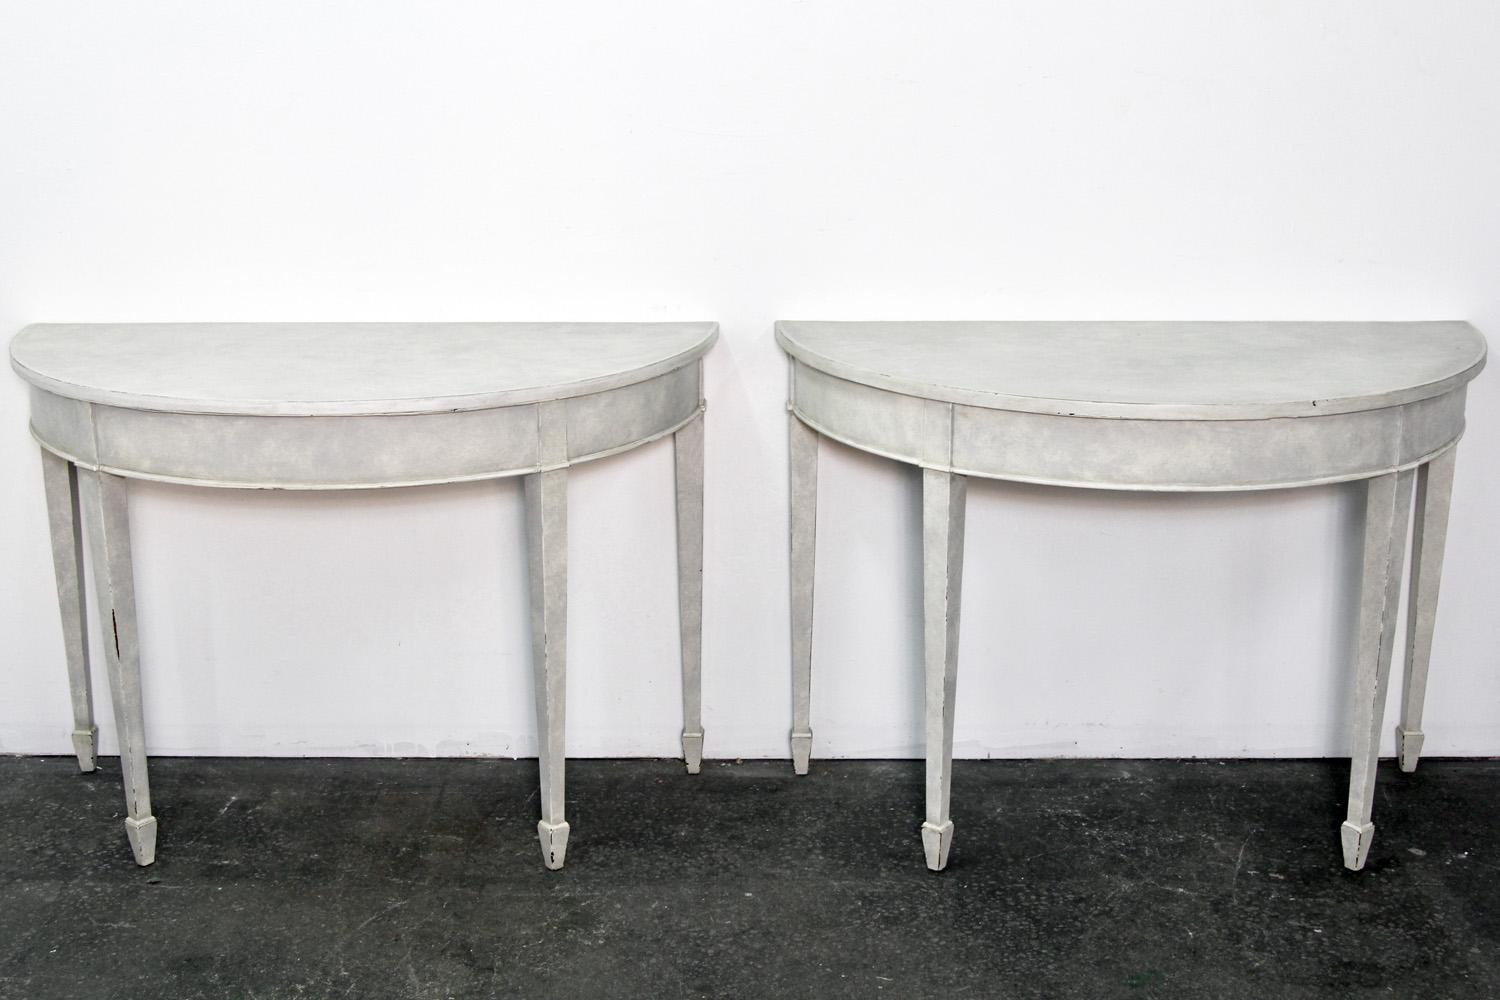 Pair of painted console tables in Gustavian finish (Grey) demilune shame.